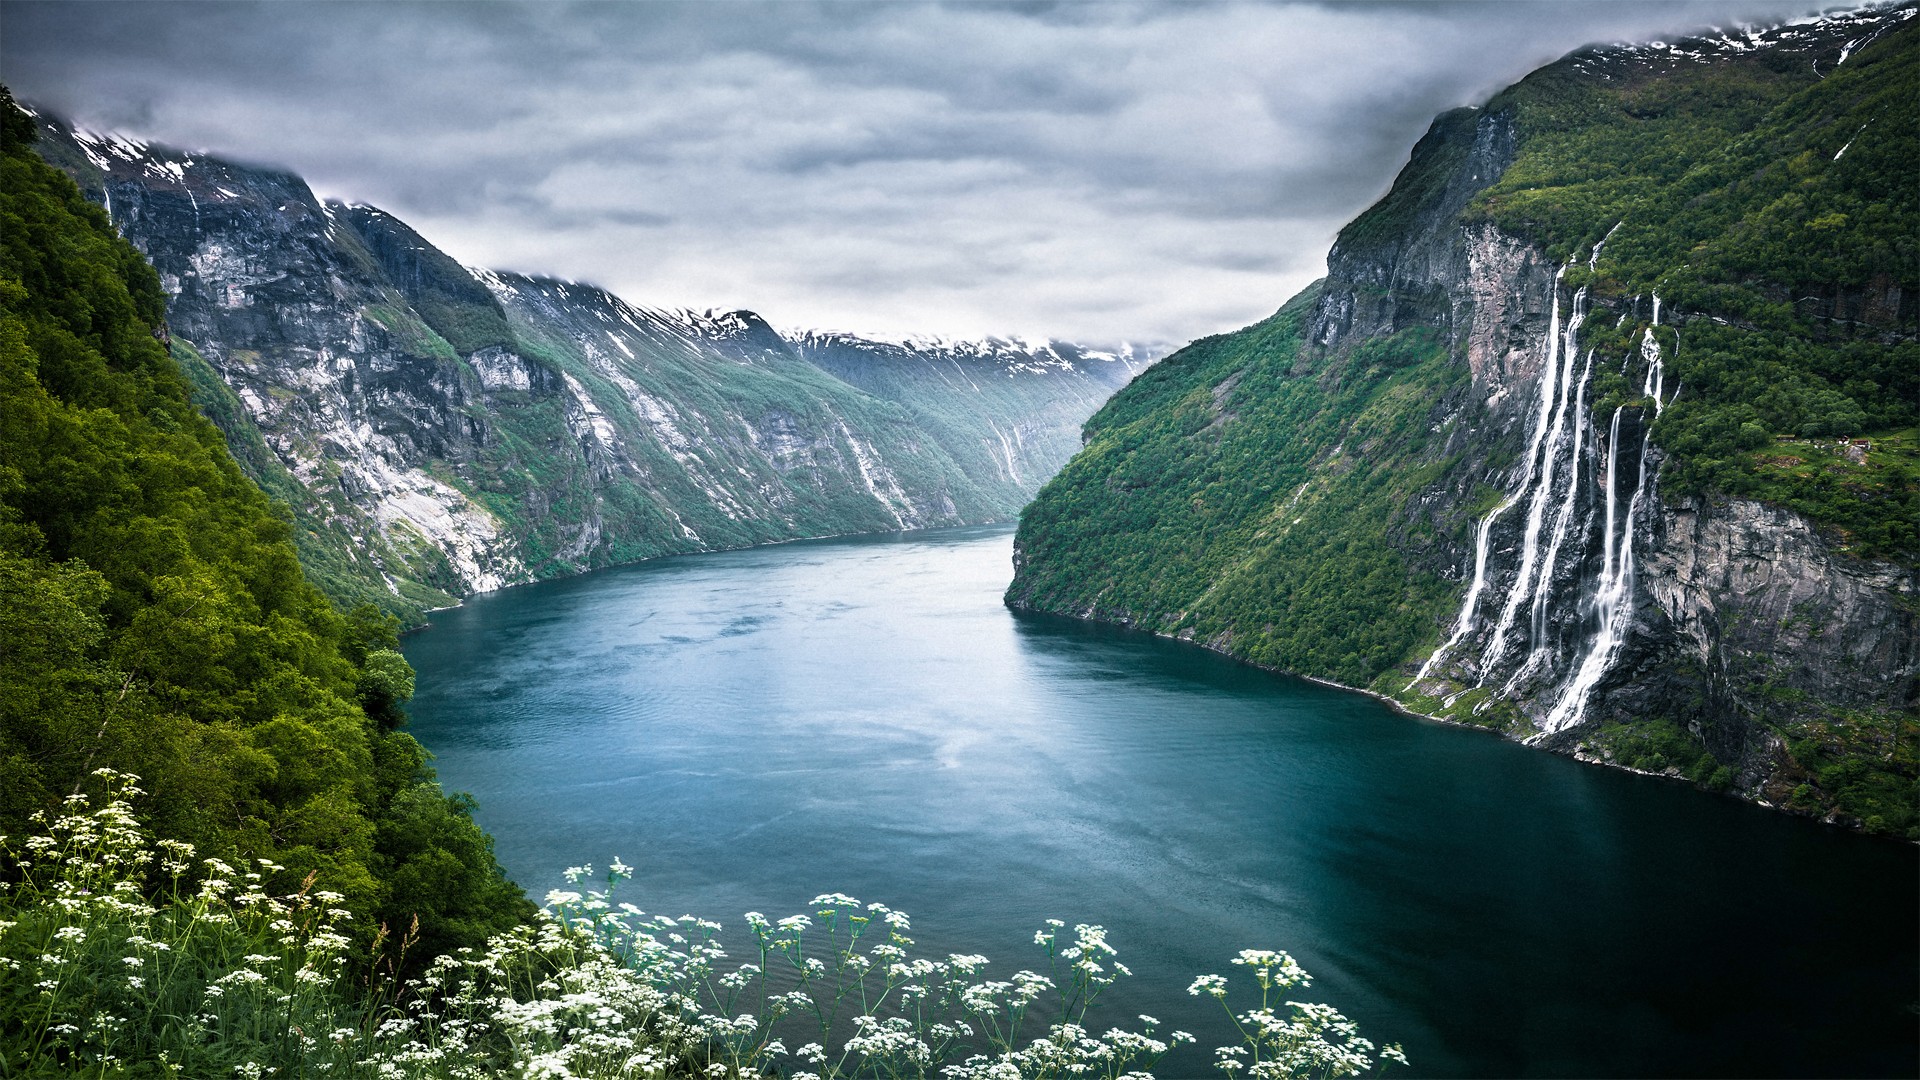 General 1920x1080 nature landscape mountains waterfall Geiranger Norway fjord cliff wildflowers foliage Seven Sisters clouds Seven Sisters Waterfall overcast